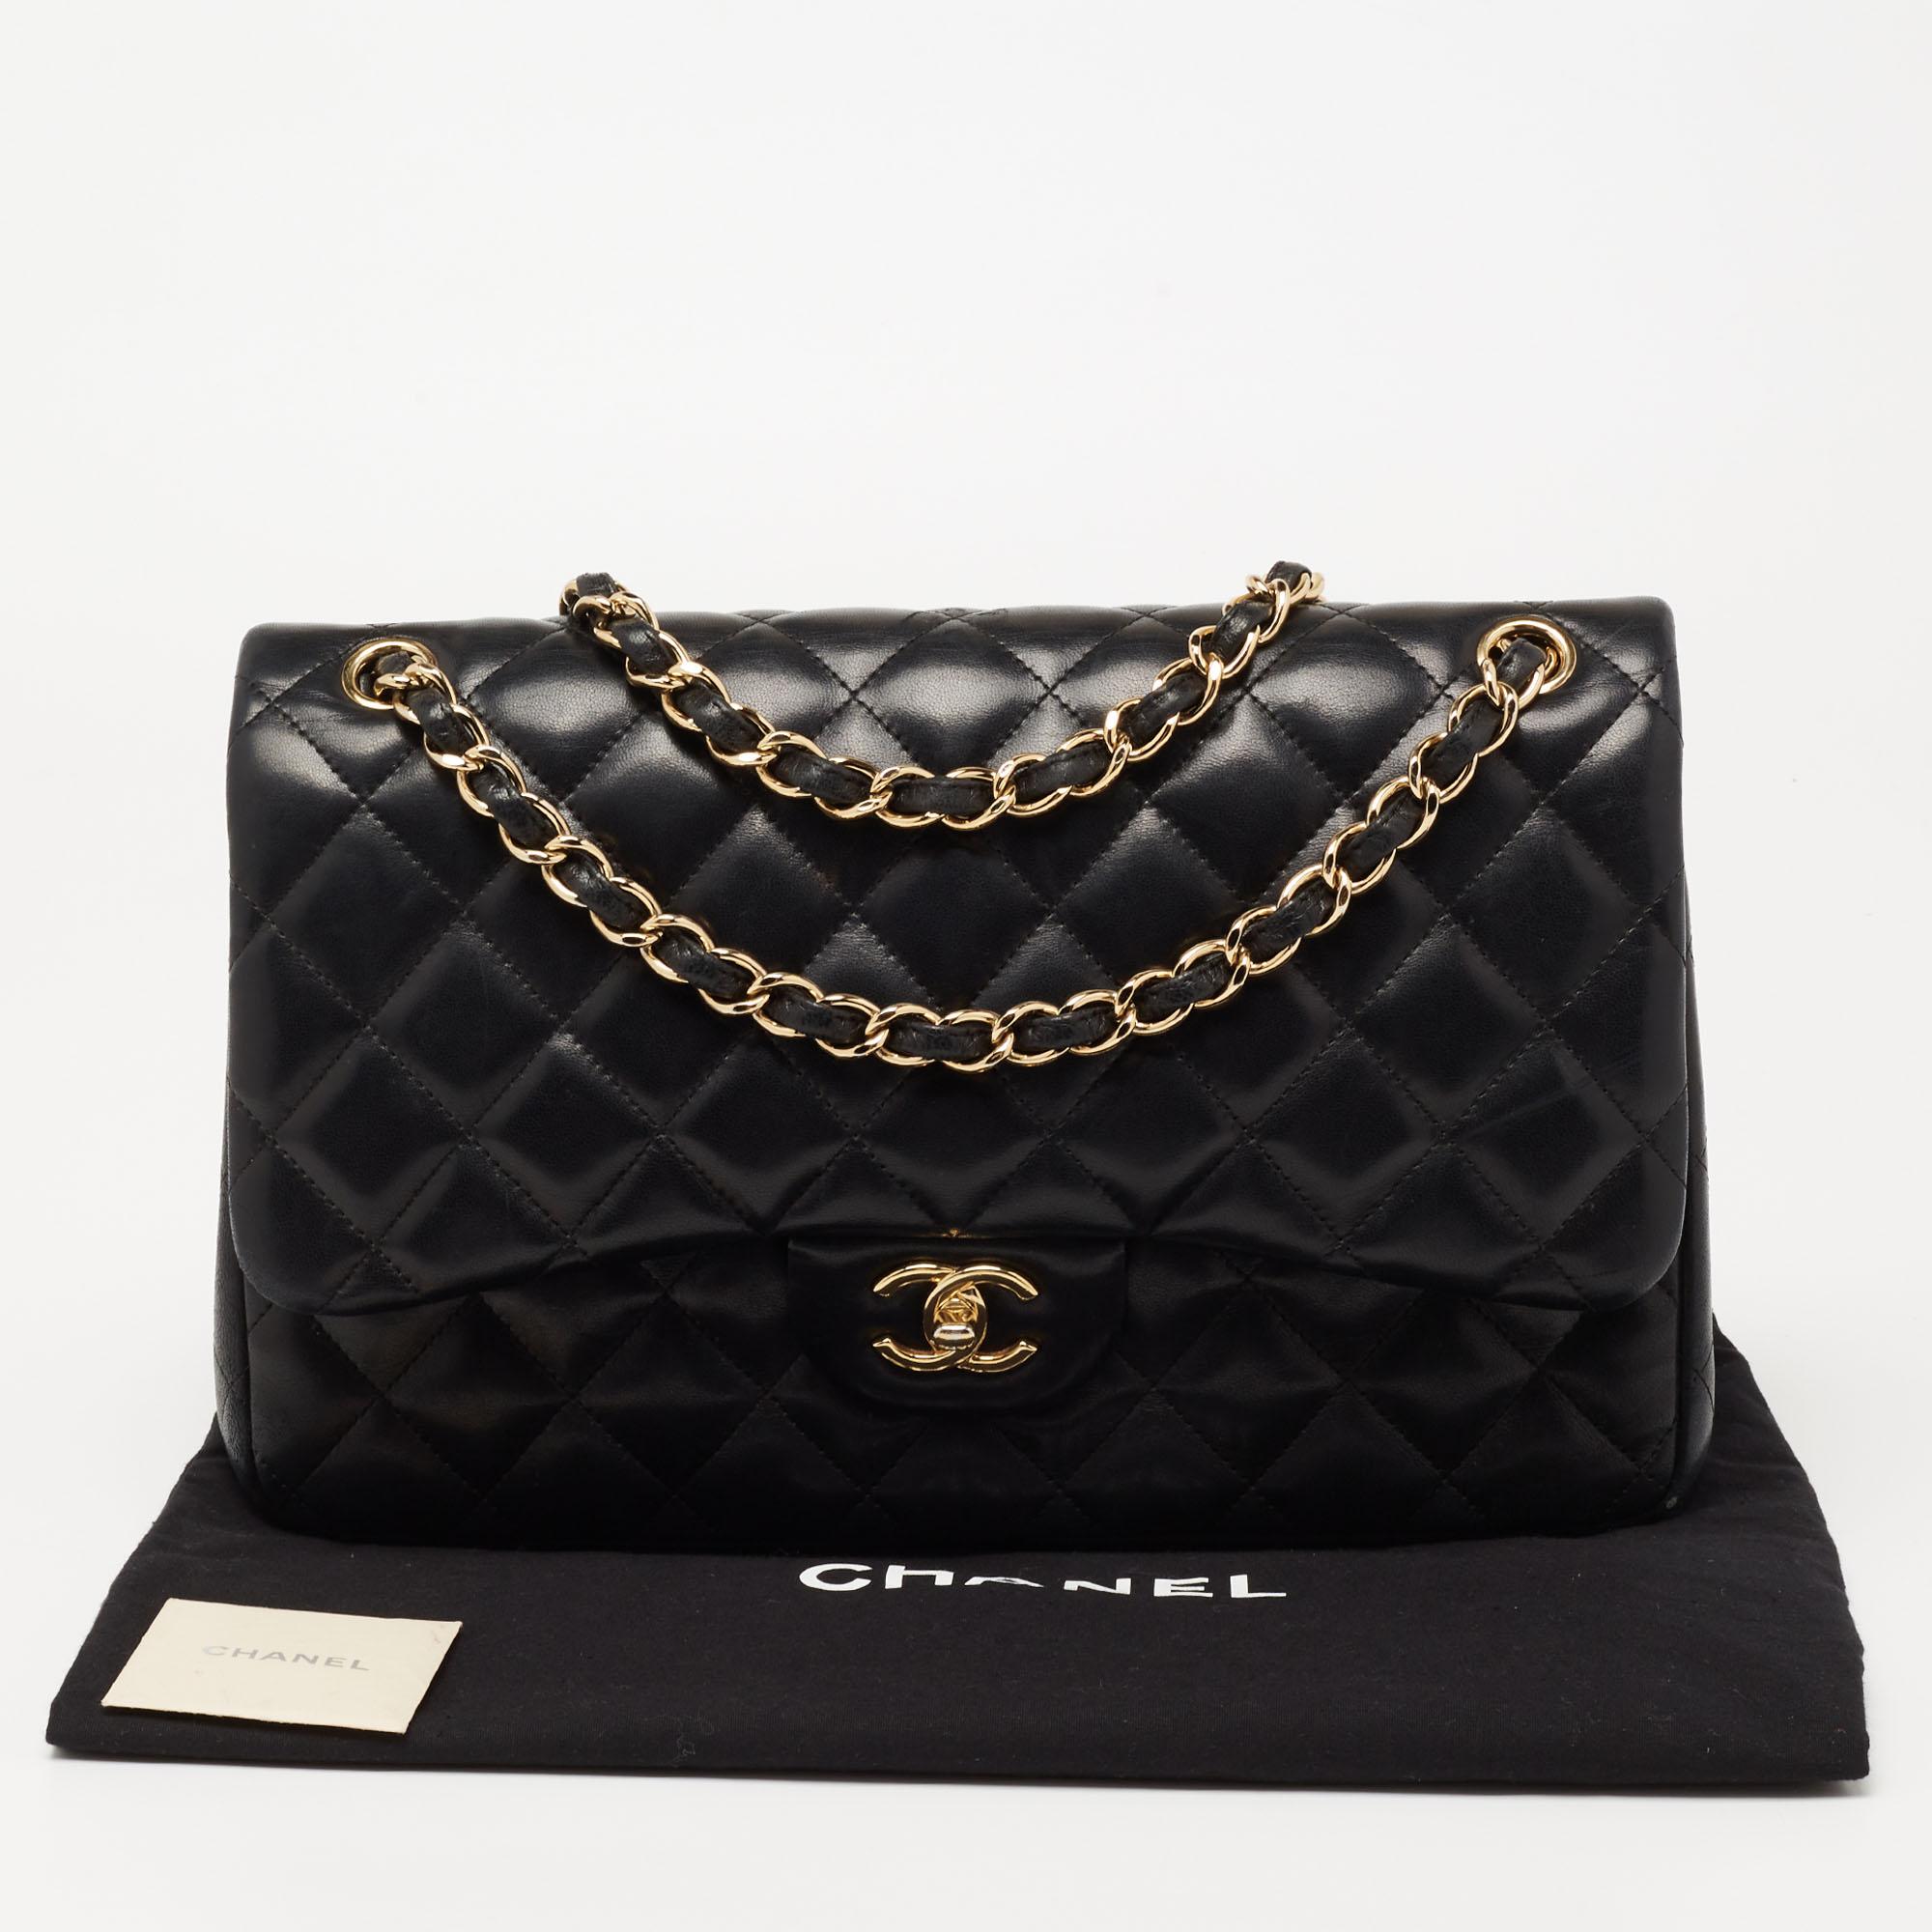 Chanel Black Quilted Leather Jumbo Classic Double Flap Bag 8